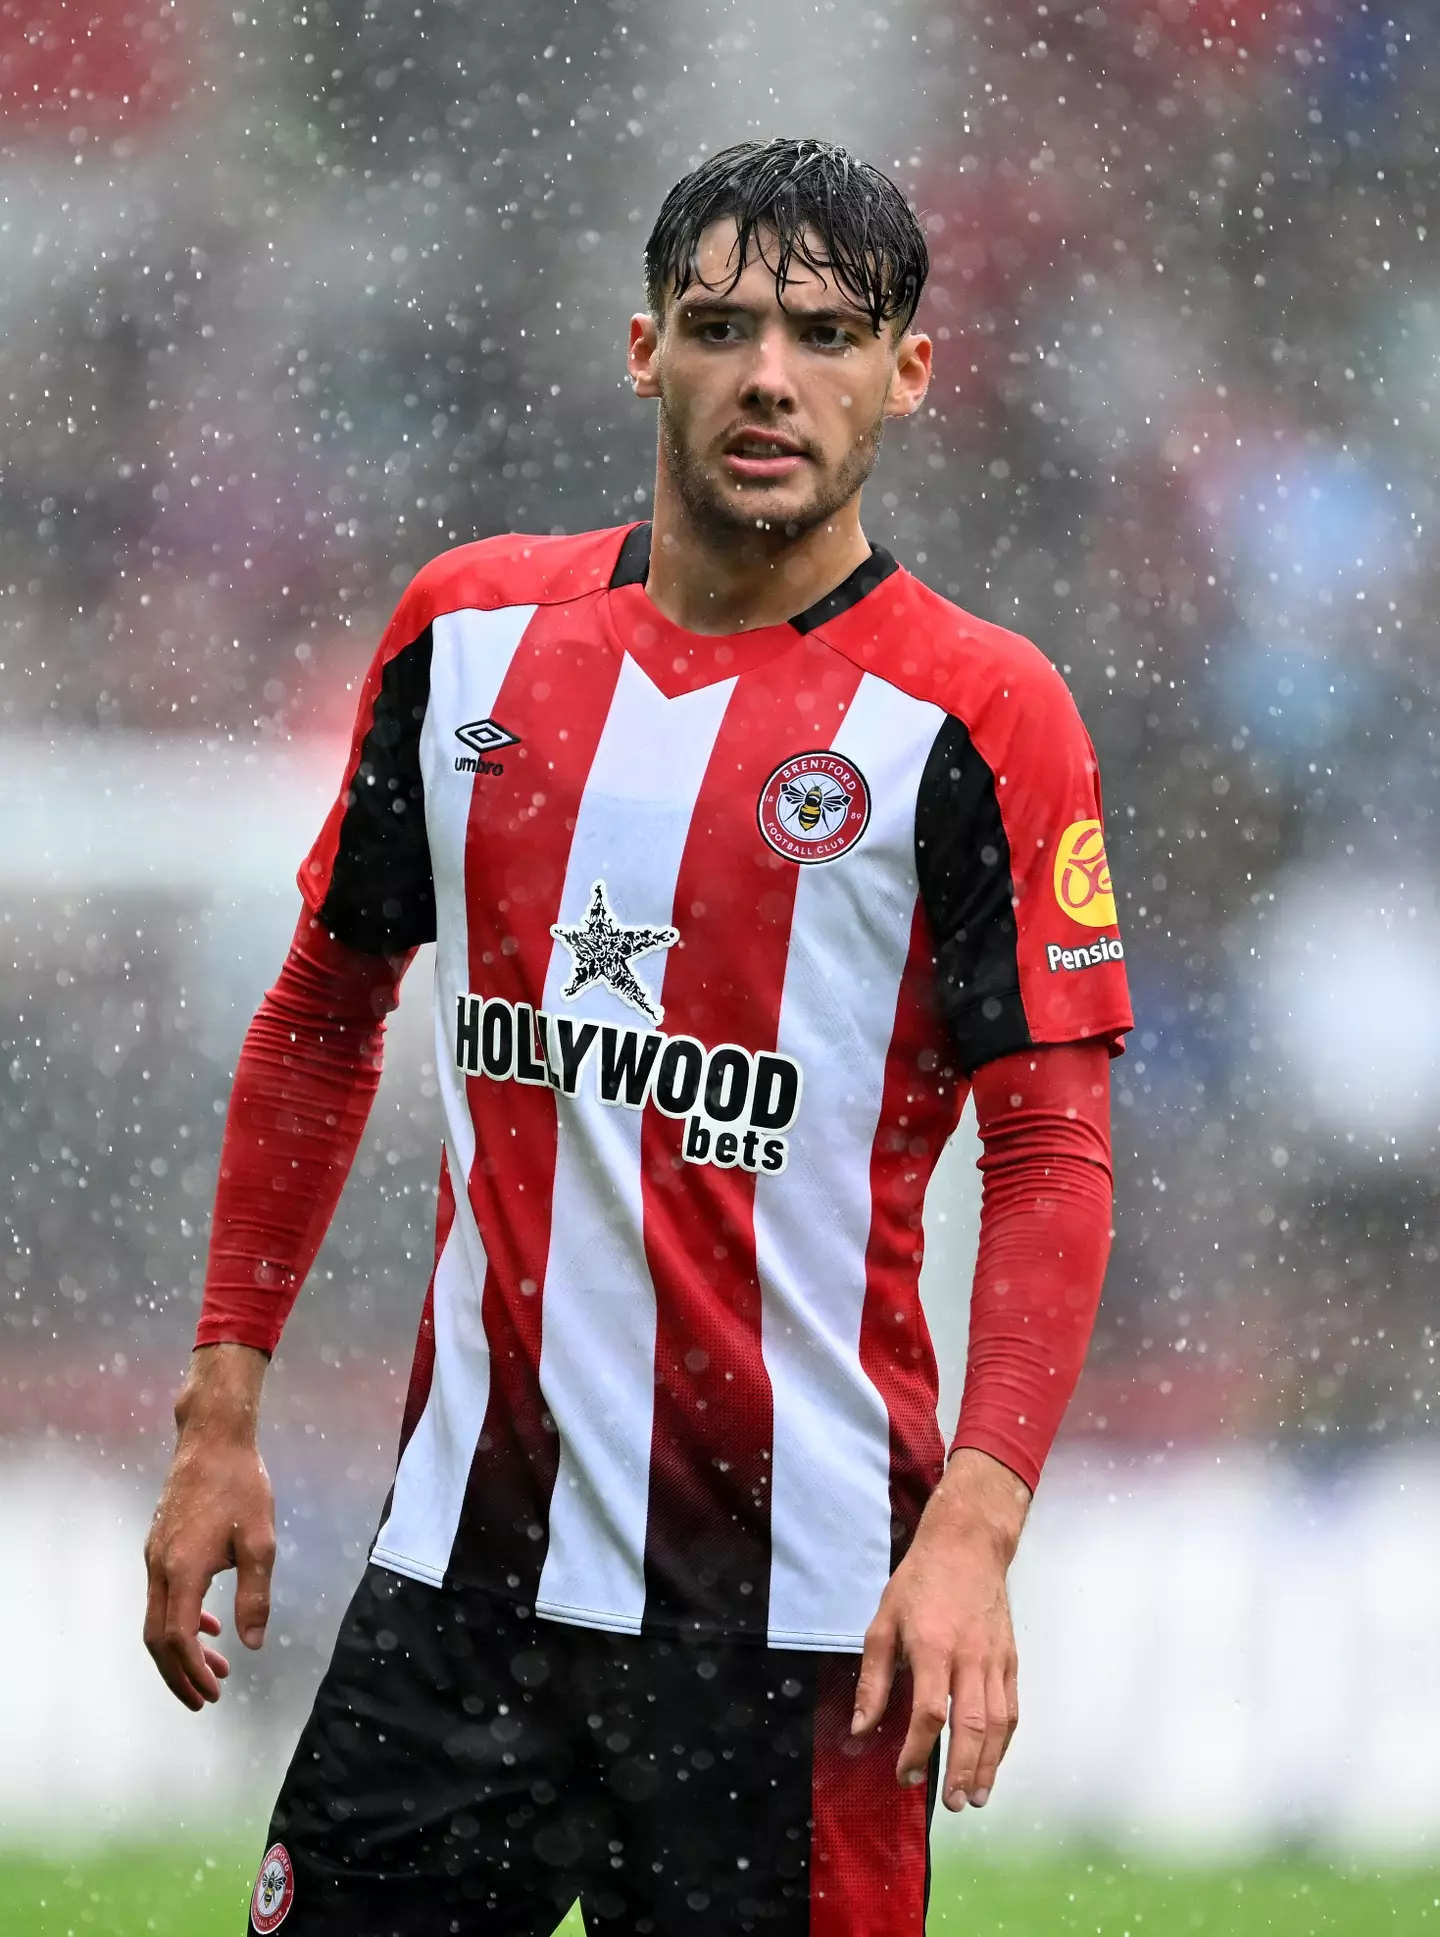 Brentford's kit features a prominent betting sponsor (Getty)